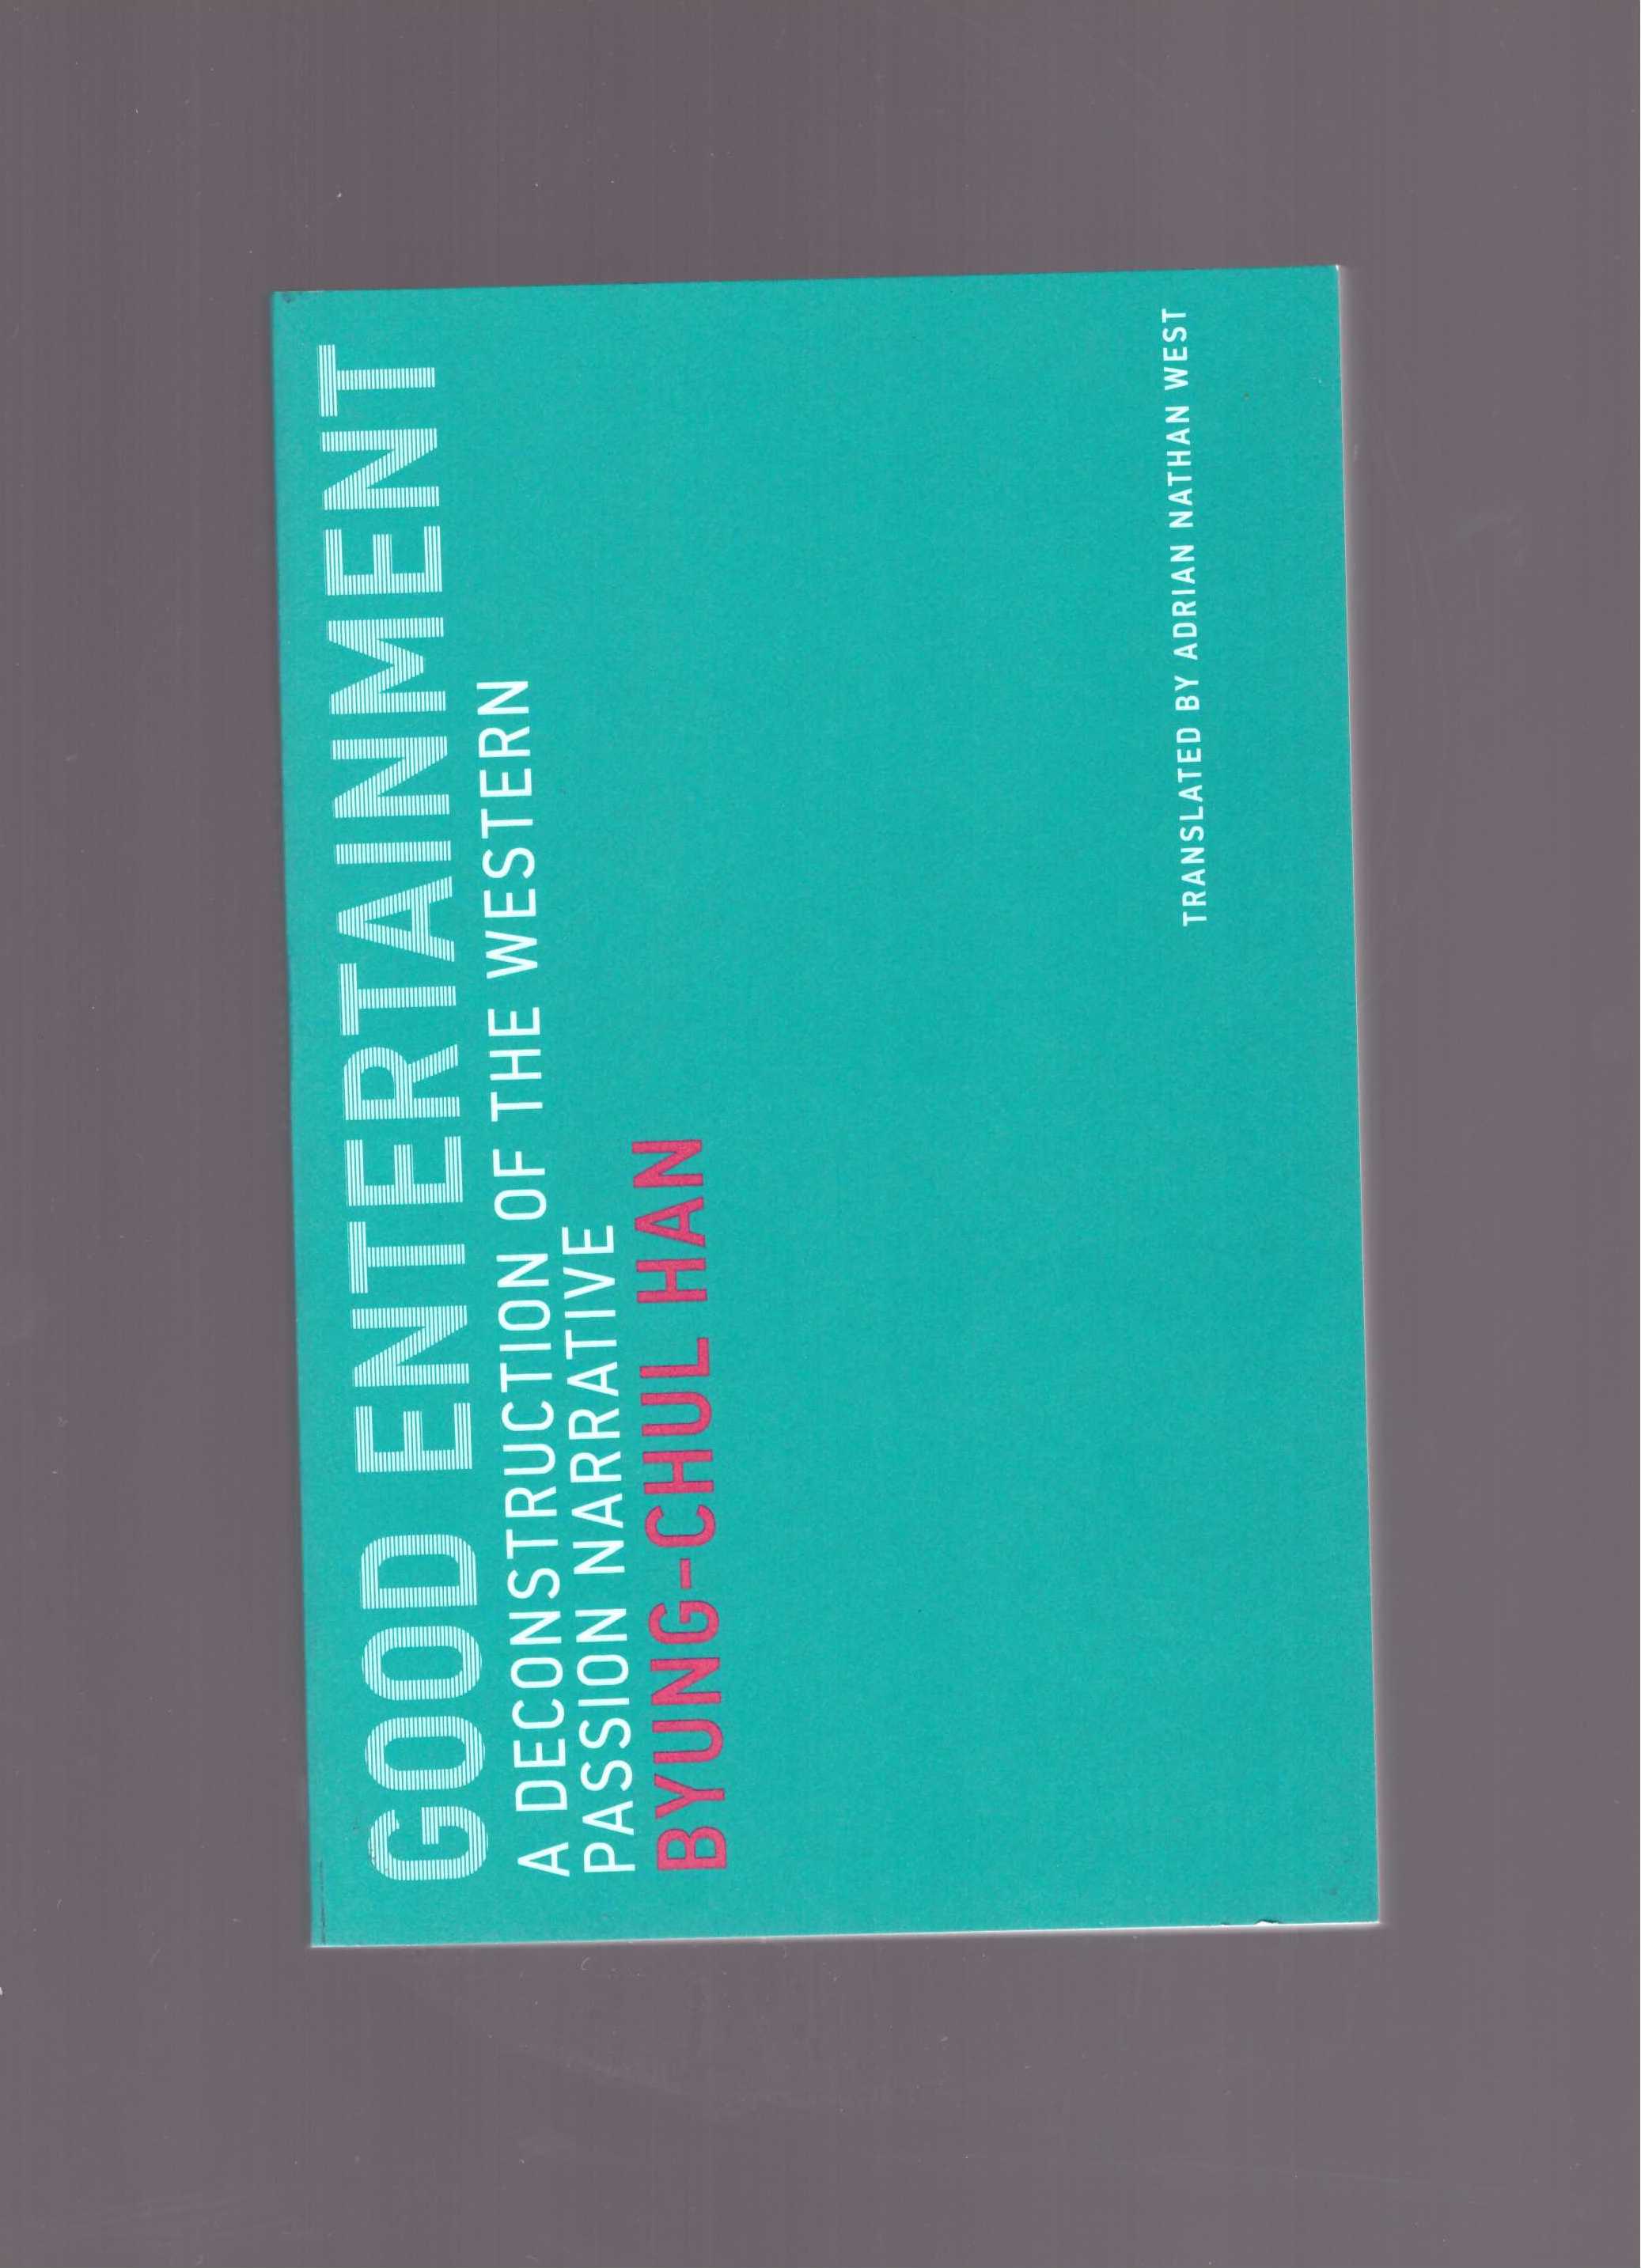 HAN, Byung-Chul  - Good Entertainment: A Deconstruction of the Western Passion Narrative